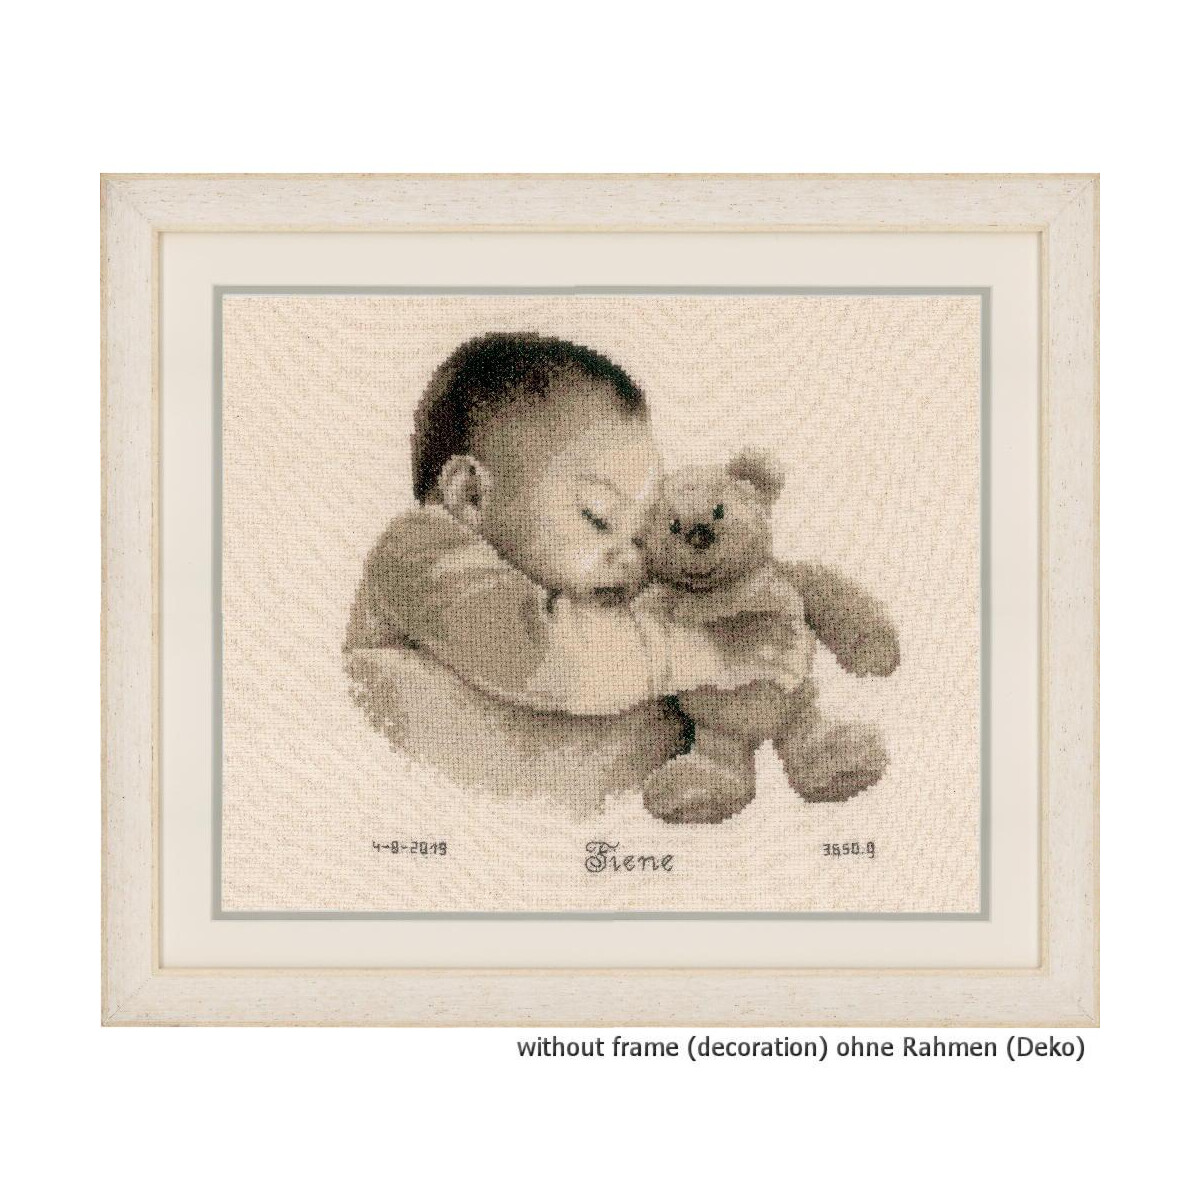 Vervaco counted cross stitch kit Baby & Teddy, DIY